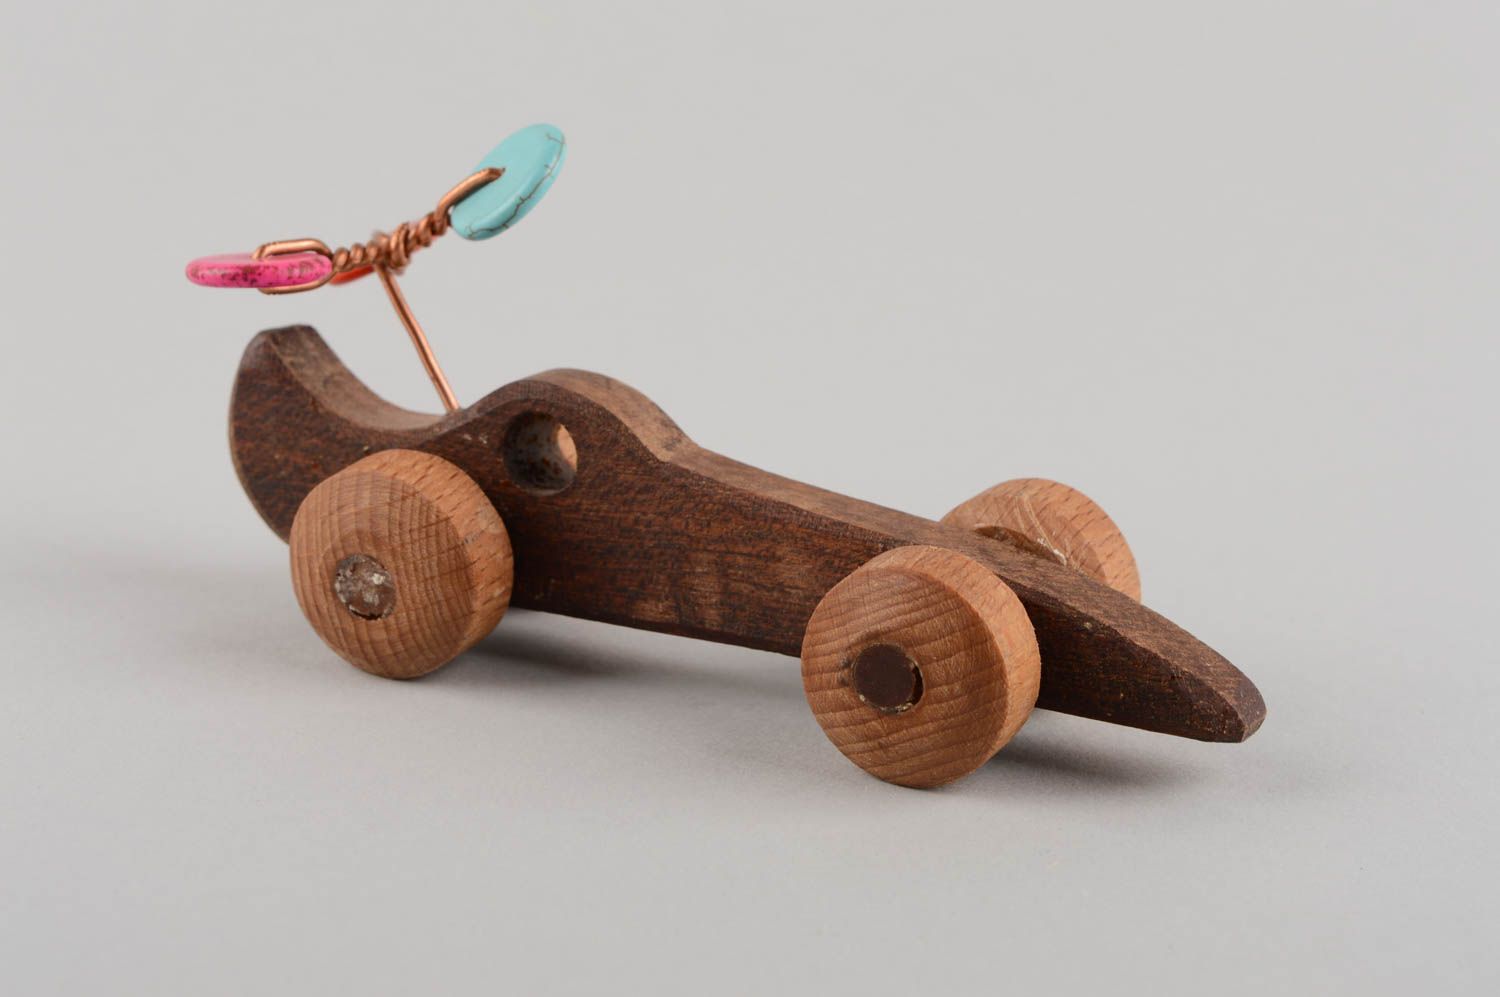 Handmade beautiful wooden eco friendly car with propeller made of stone photo 2